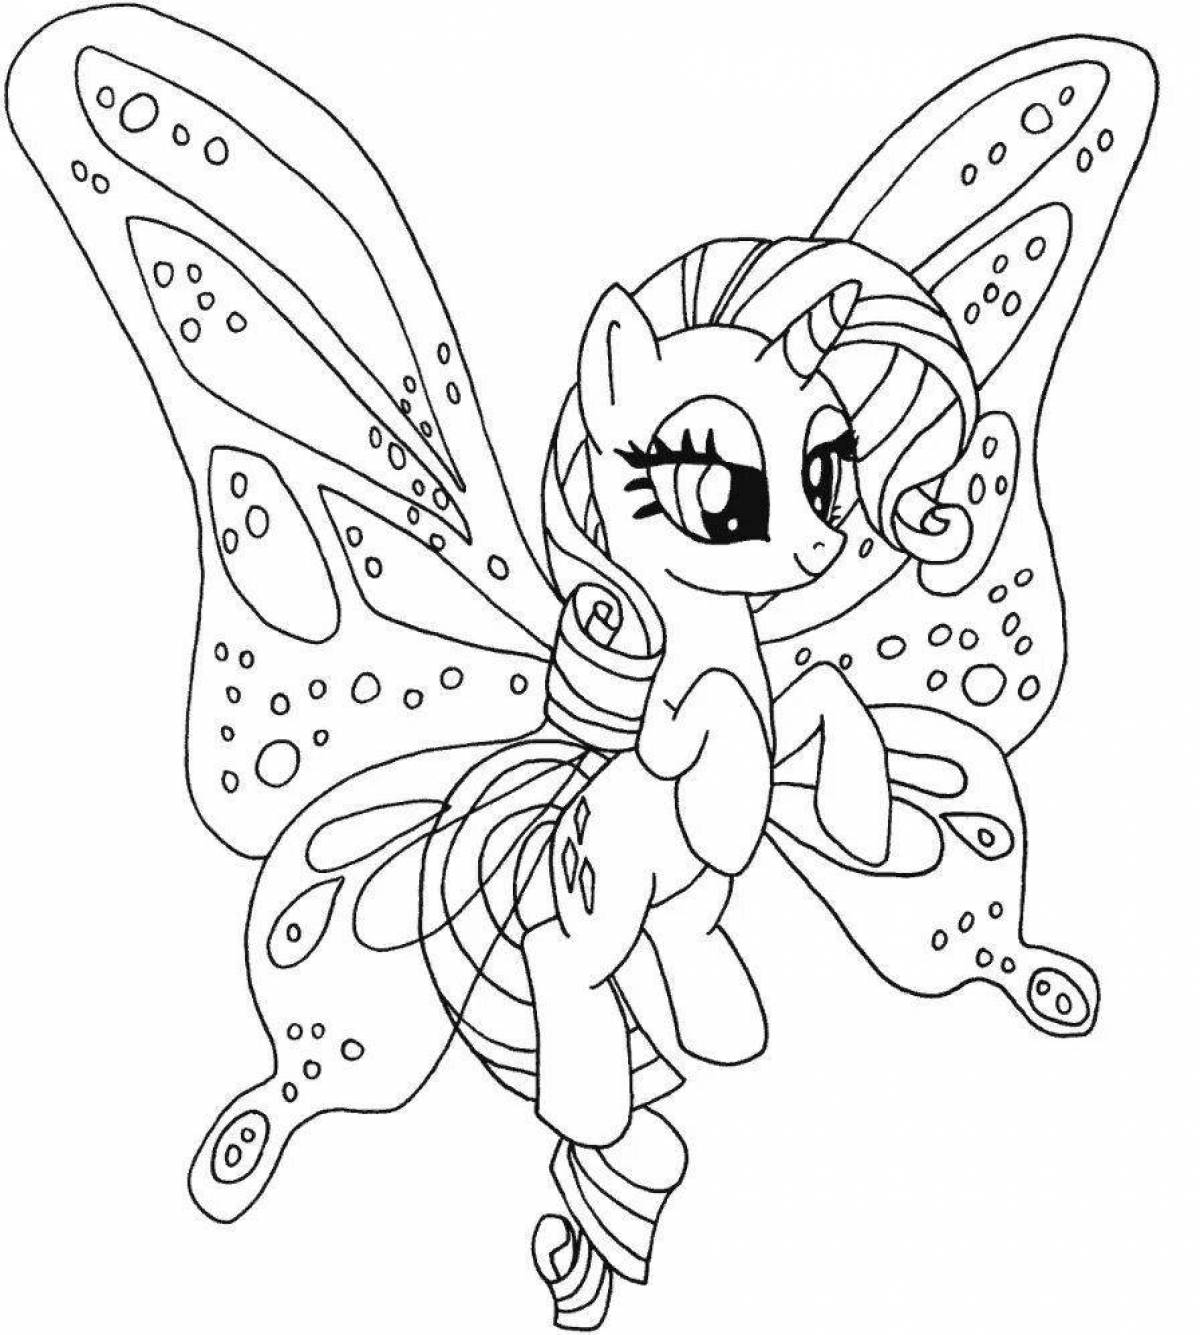 Little pony playable coloring page